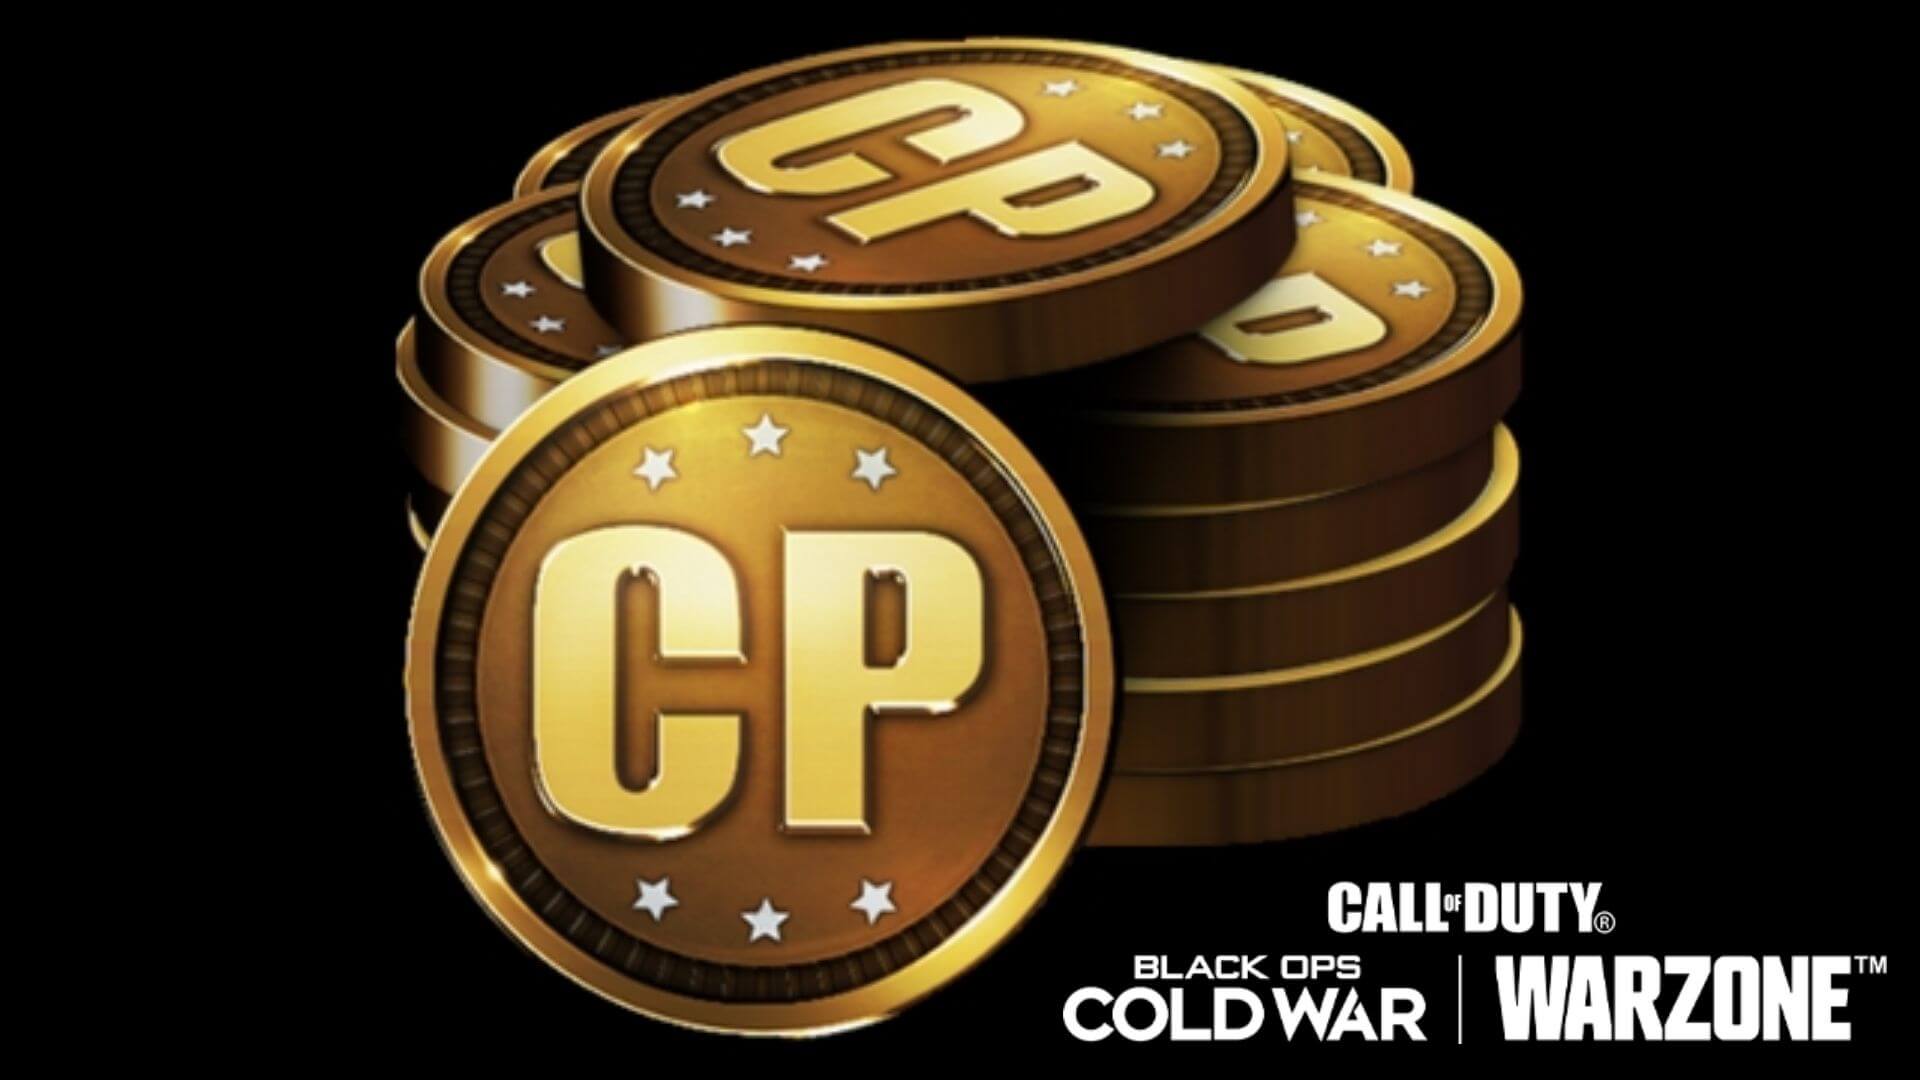 How to get Free COD points in Call of Duty Mobile